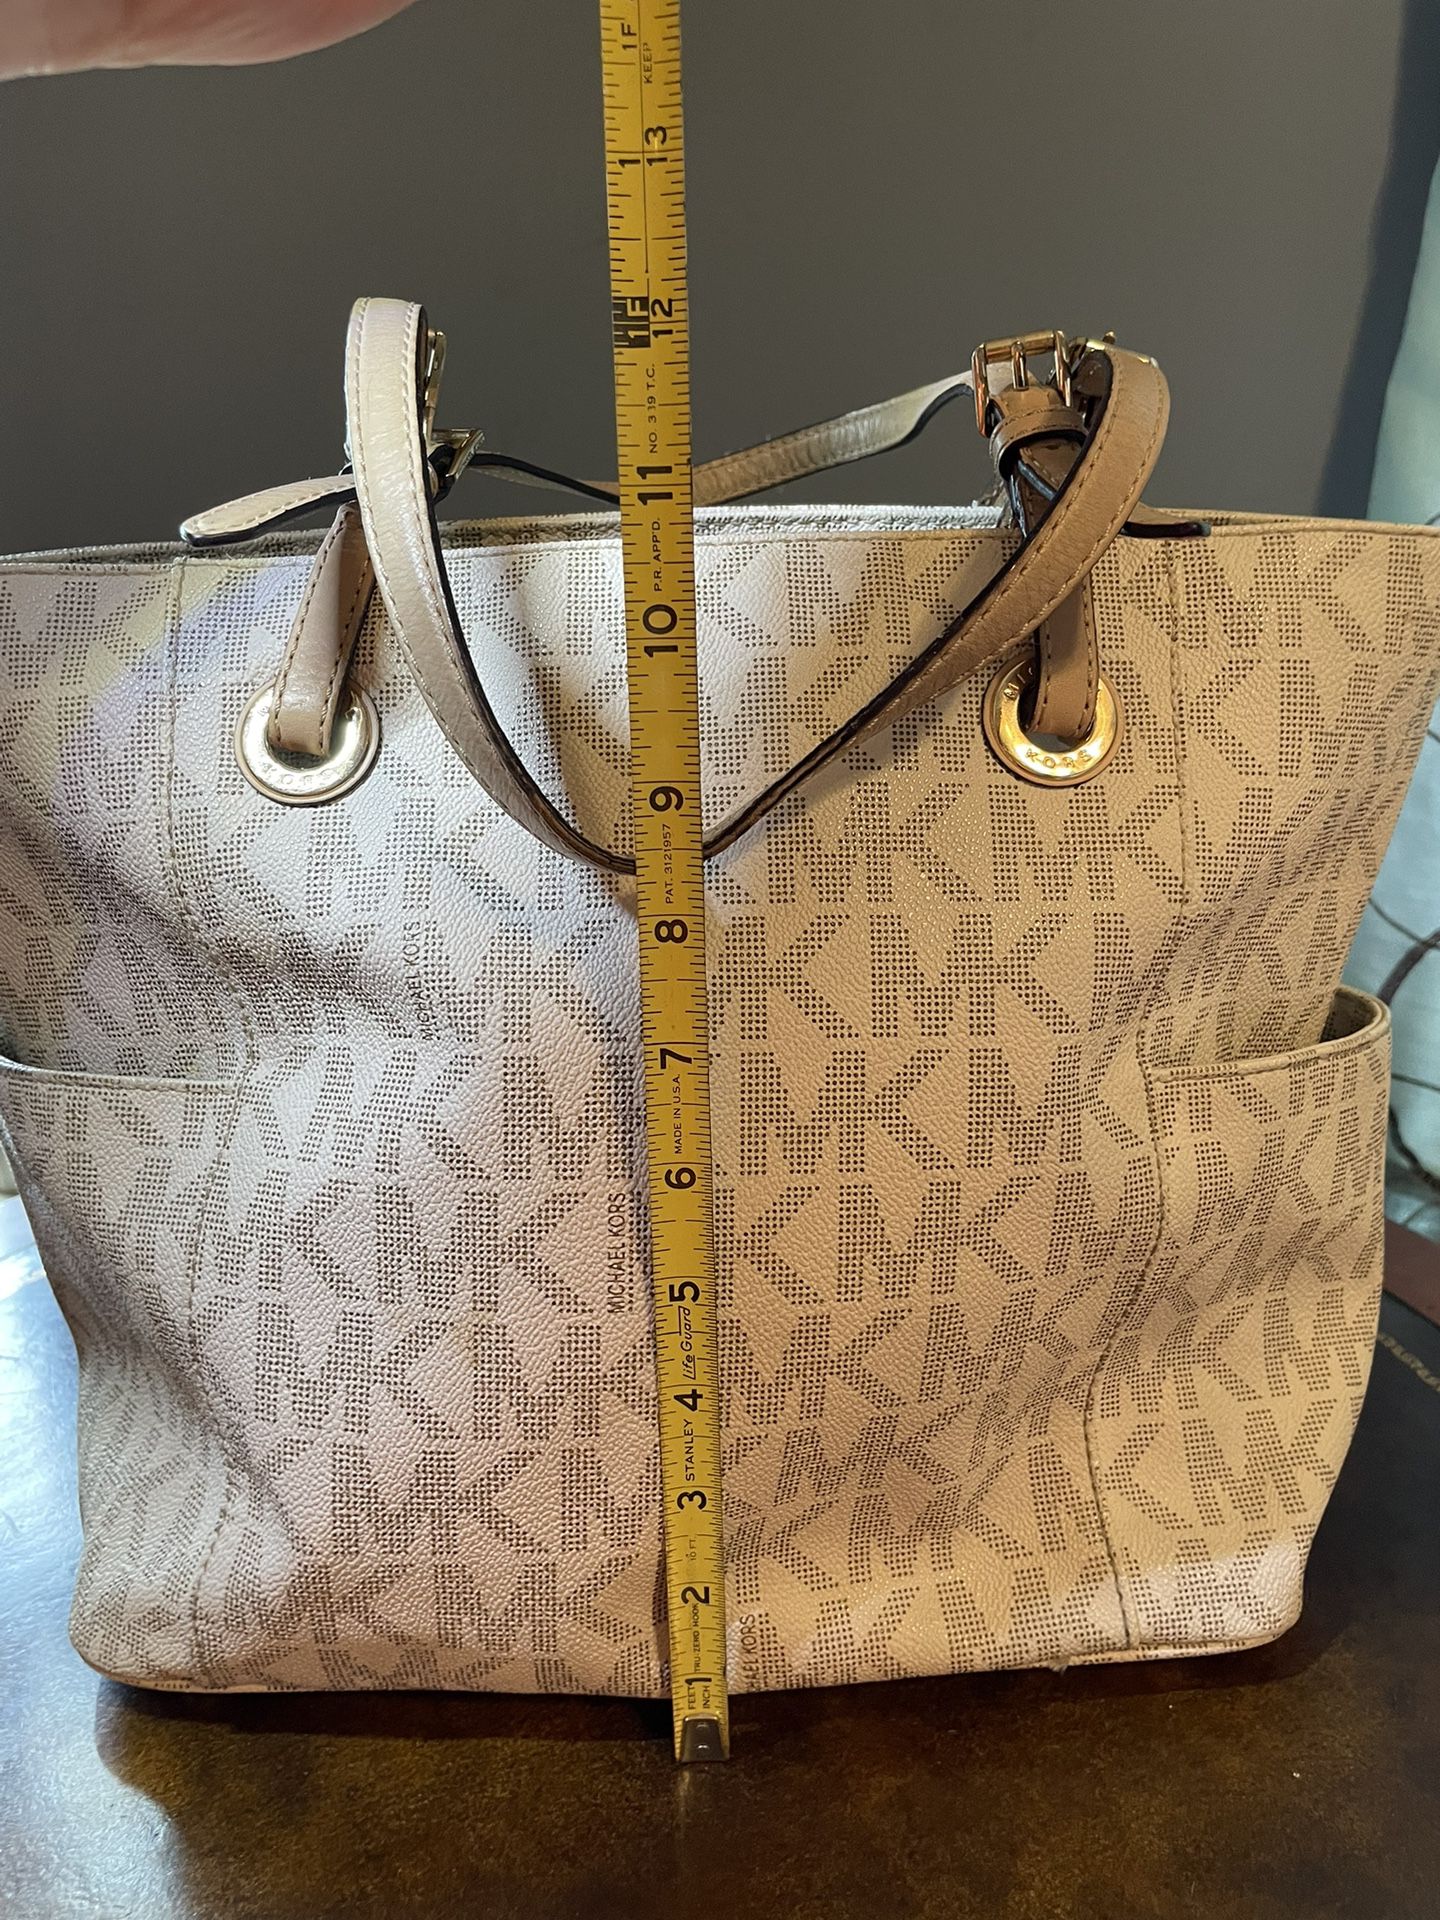 Charlotte Large Saffiano Leather Top-Zip Tote Bag' for Sale in Kingsville,  OH - OfferUp